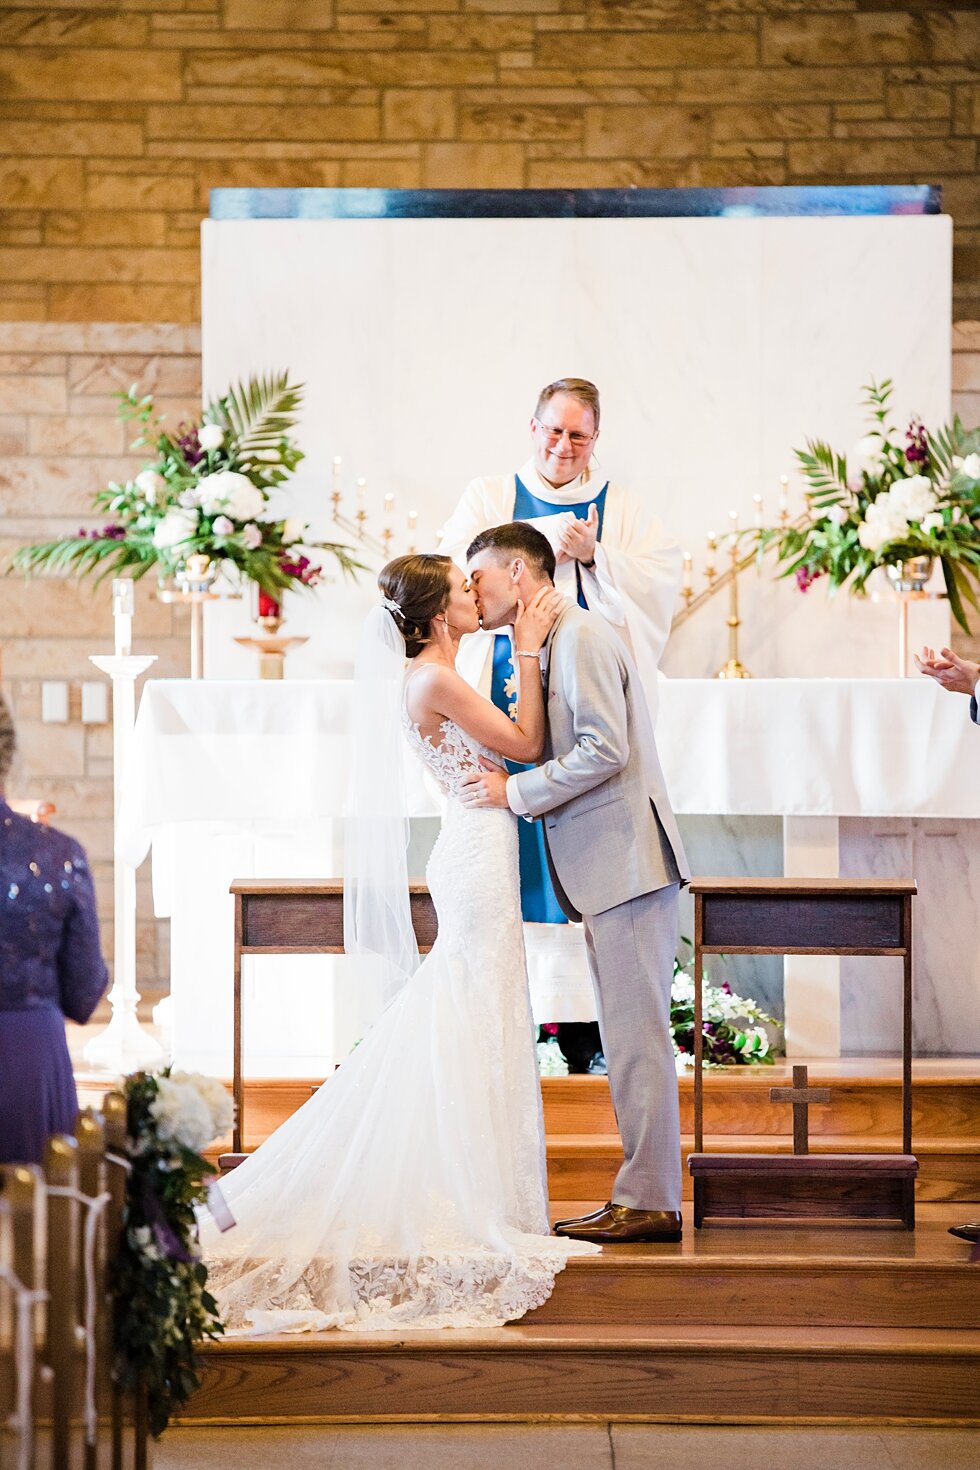  Bride and groom are pronounced husband and wife at the end of their wedding ceremony in Kentucky. wedding ceremony details stunning photography married midwest louisville kentucky #weddingphoto #love #justmarried #midwestphotographer #kywedding #lou